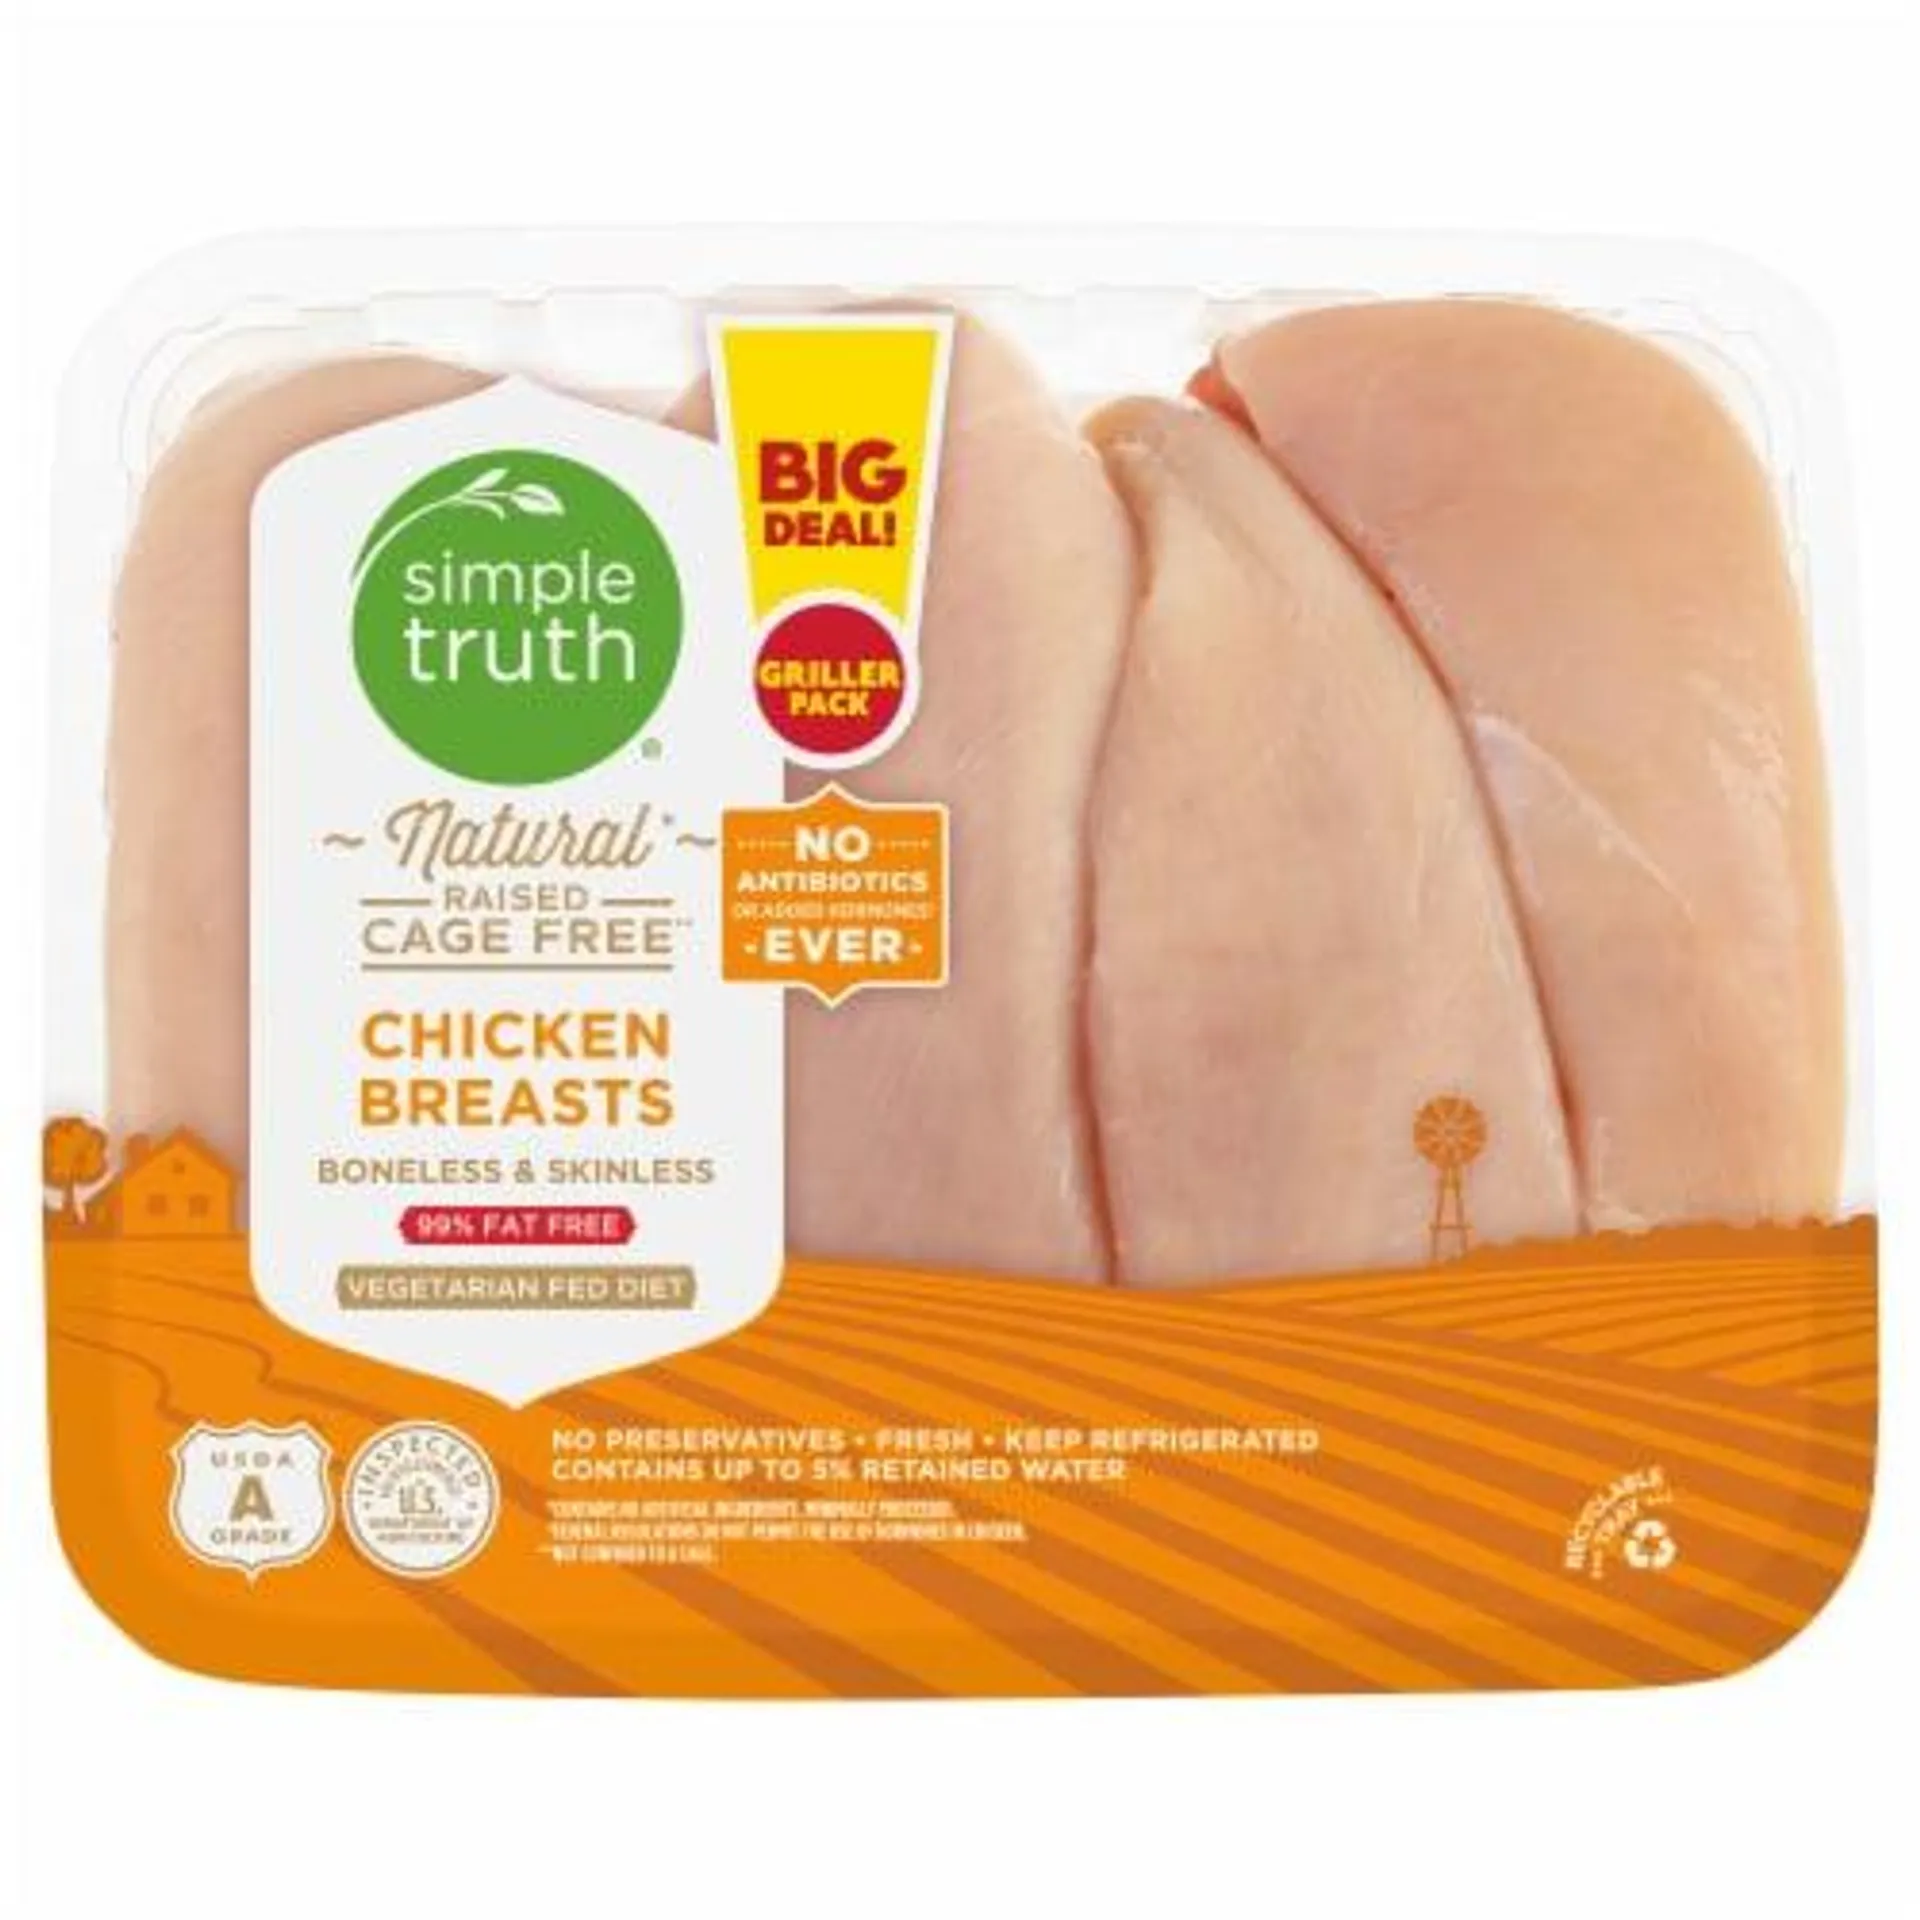 Simple Truth™ Boneless & Skinless Natural Chicken Breasts BIG Deal!